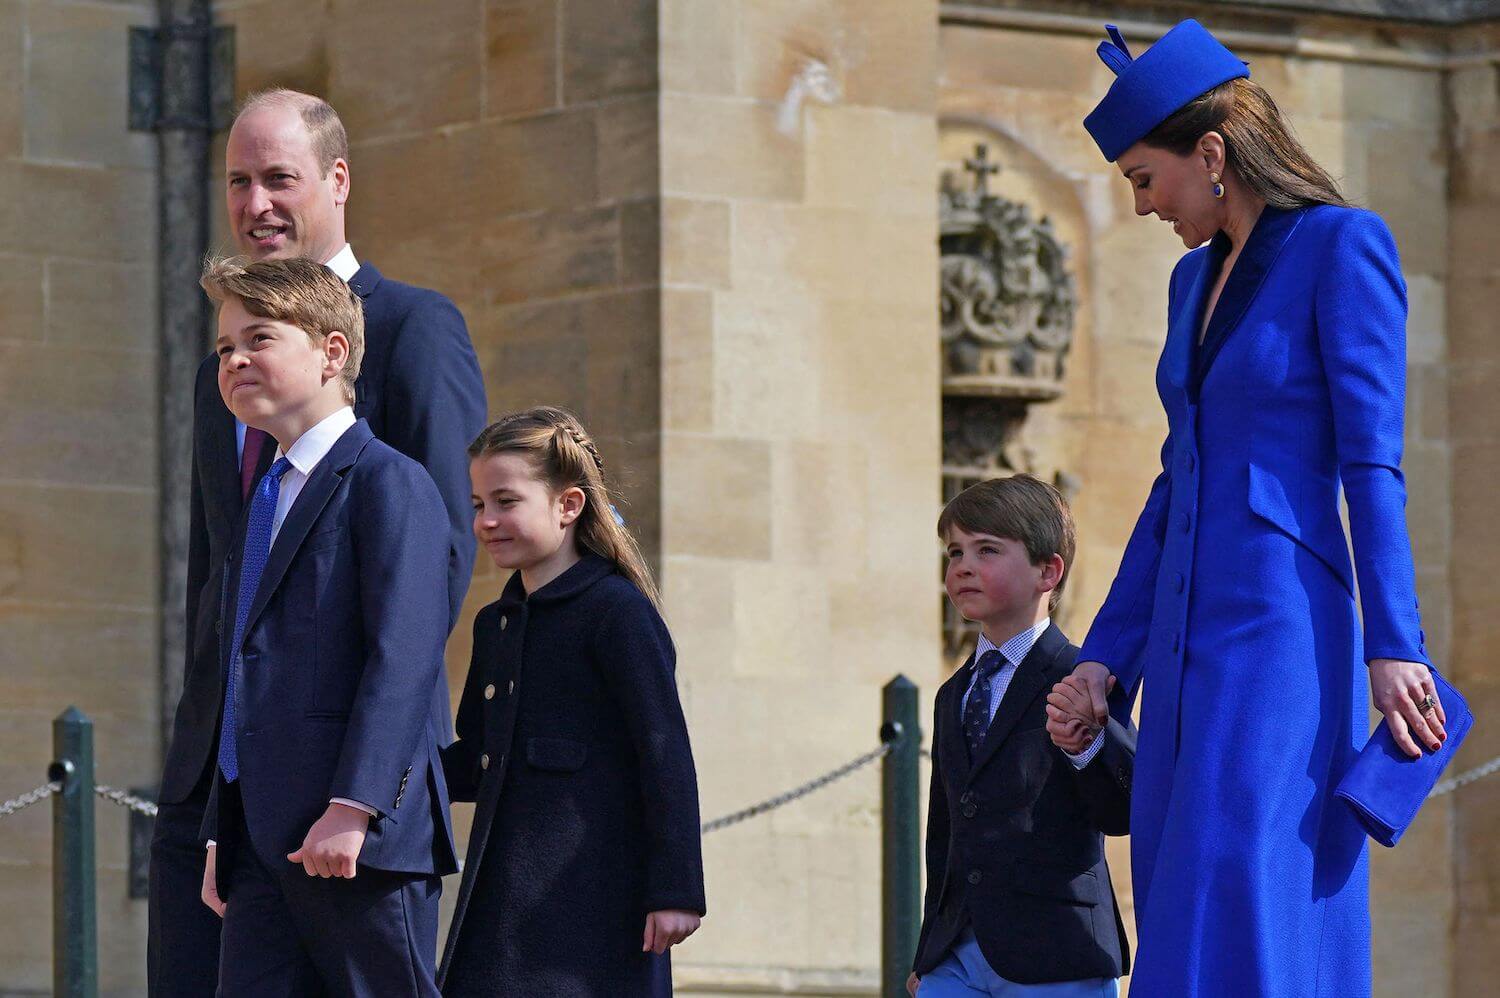 Kate Middleton dressed in vibrant blue looks at son Prince Louis with pride as they walk with Prince William Prince George, and Princess Charlotte